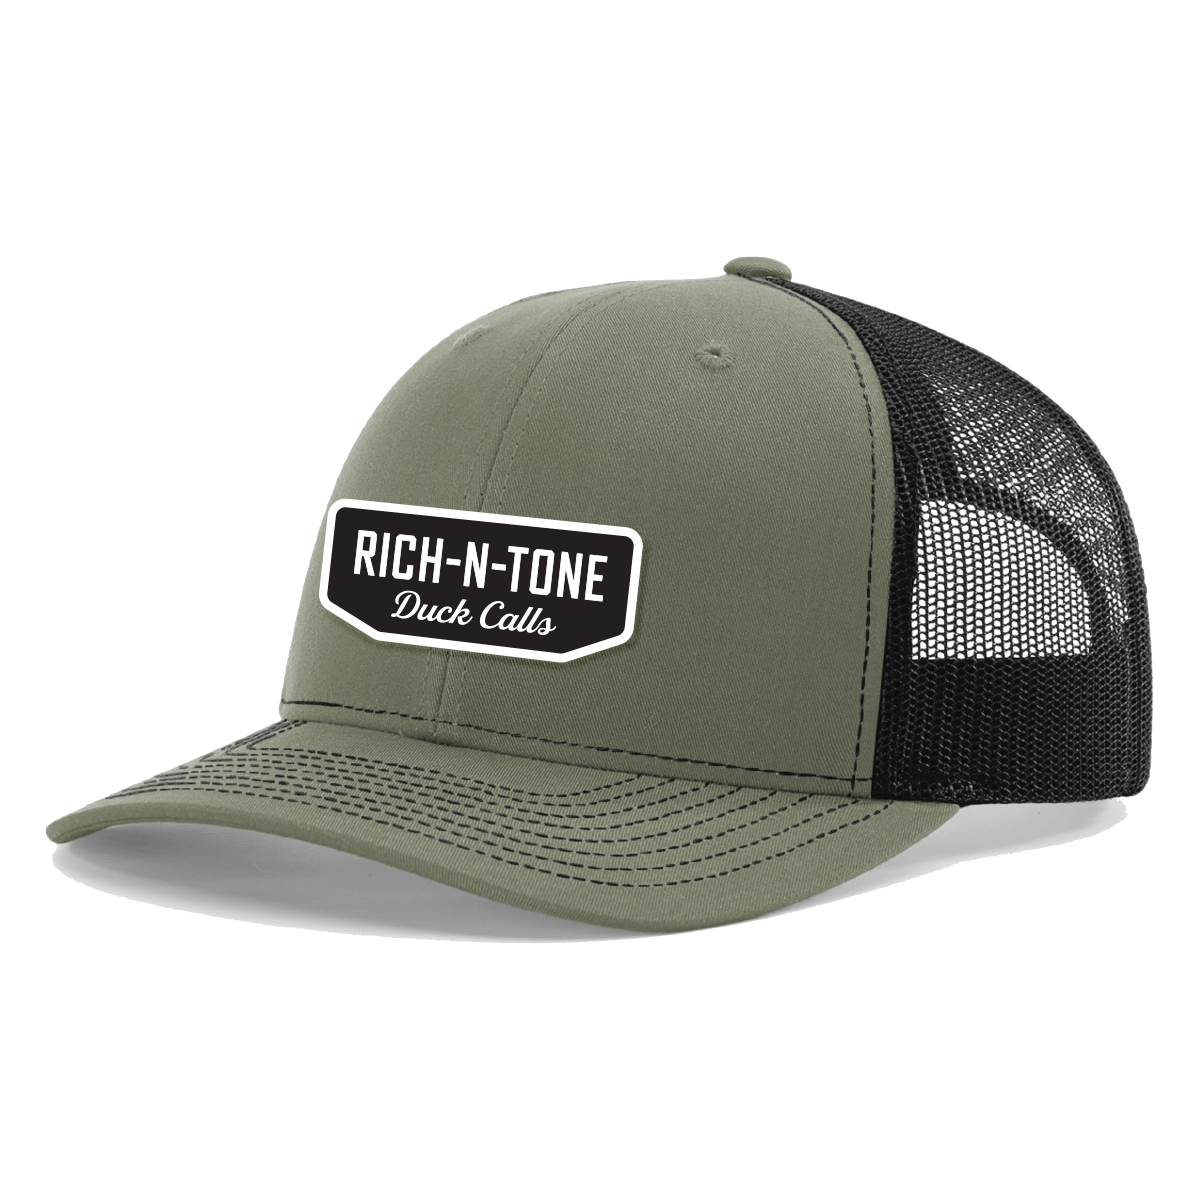 RNT Rope Patch - Loden Green/Black